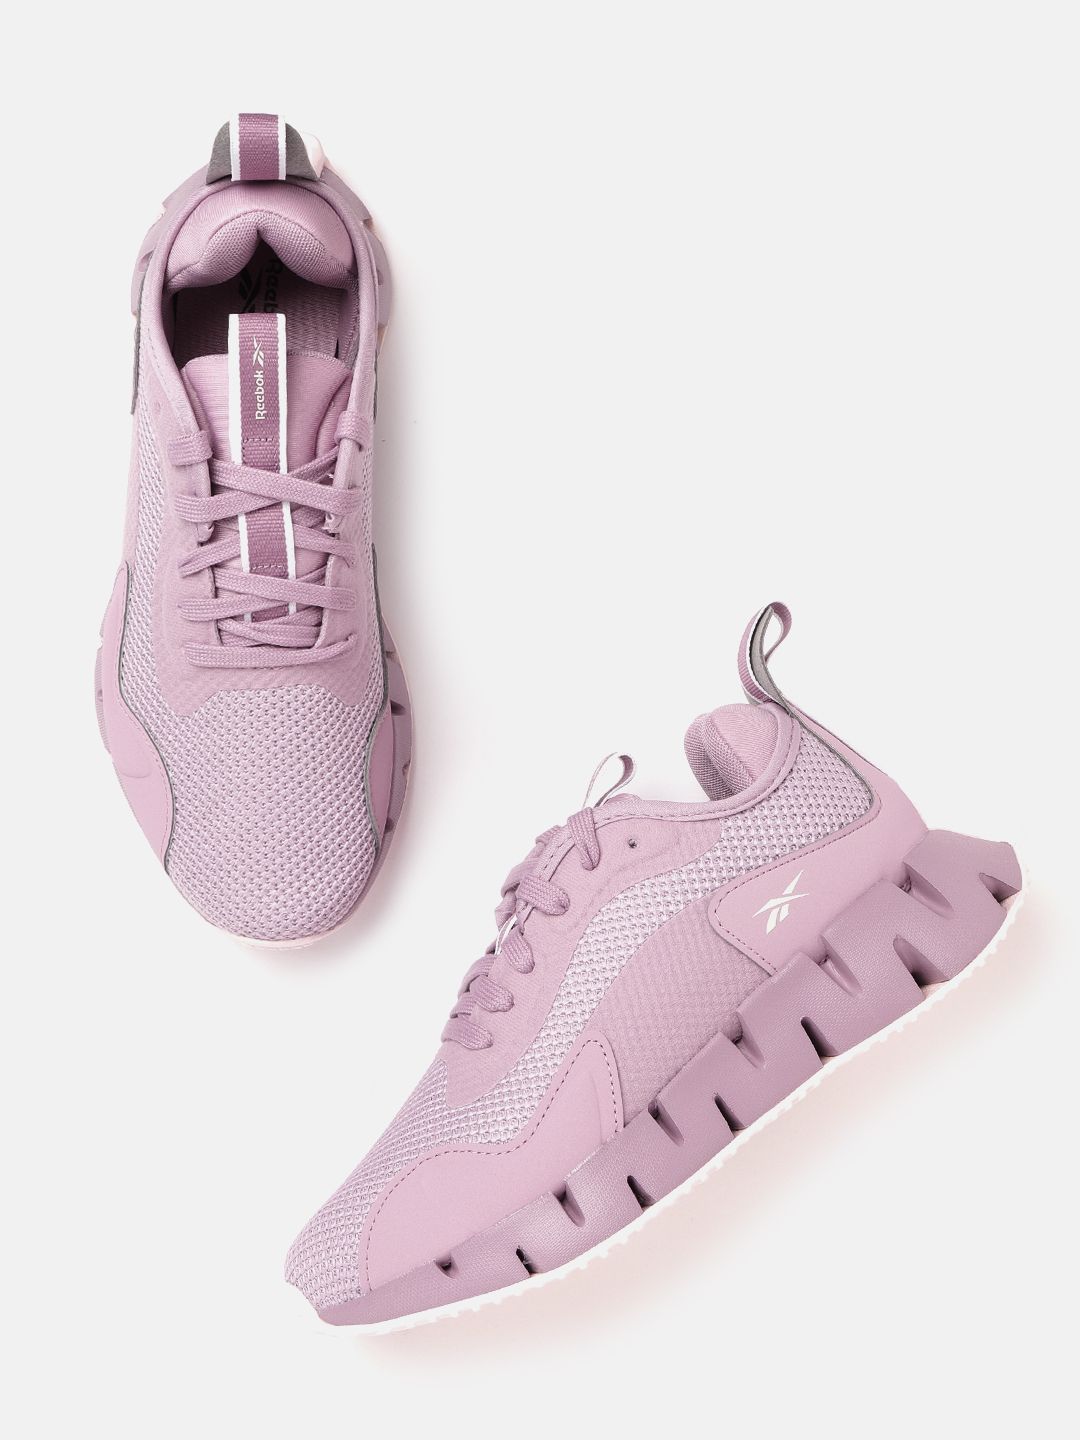 Reebok Women Mauve Woven Design Zig Dynamica Running Shoes Price in India